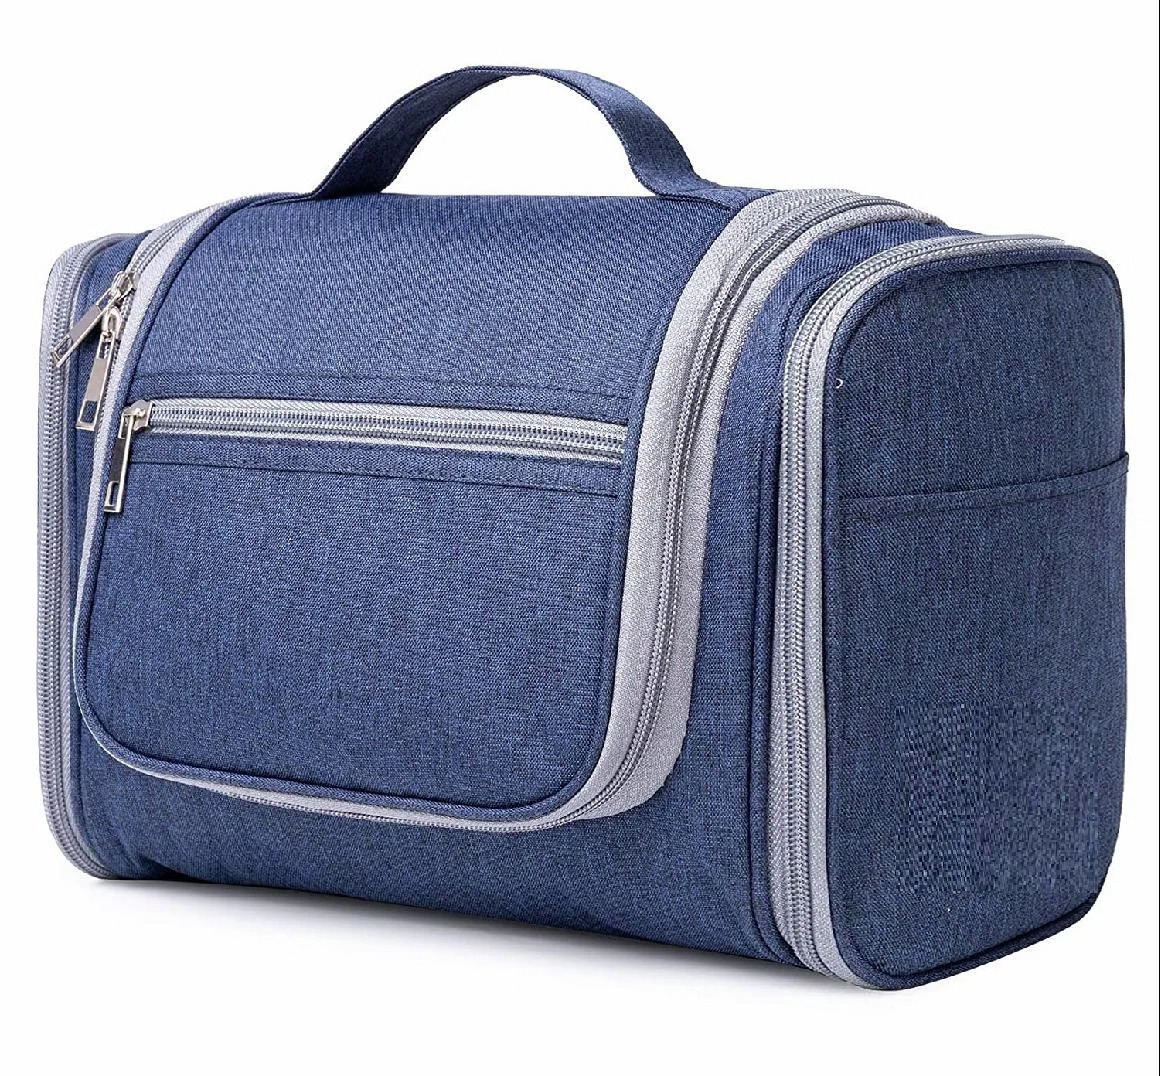 Extra Large Toiletry Bag With Compartments